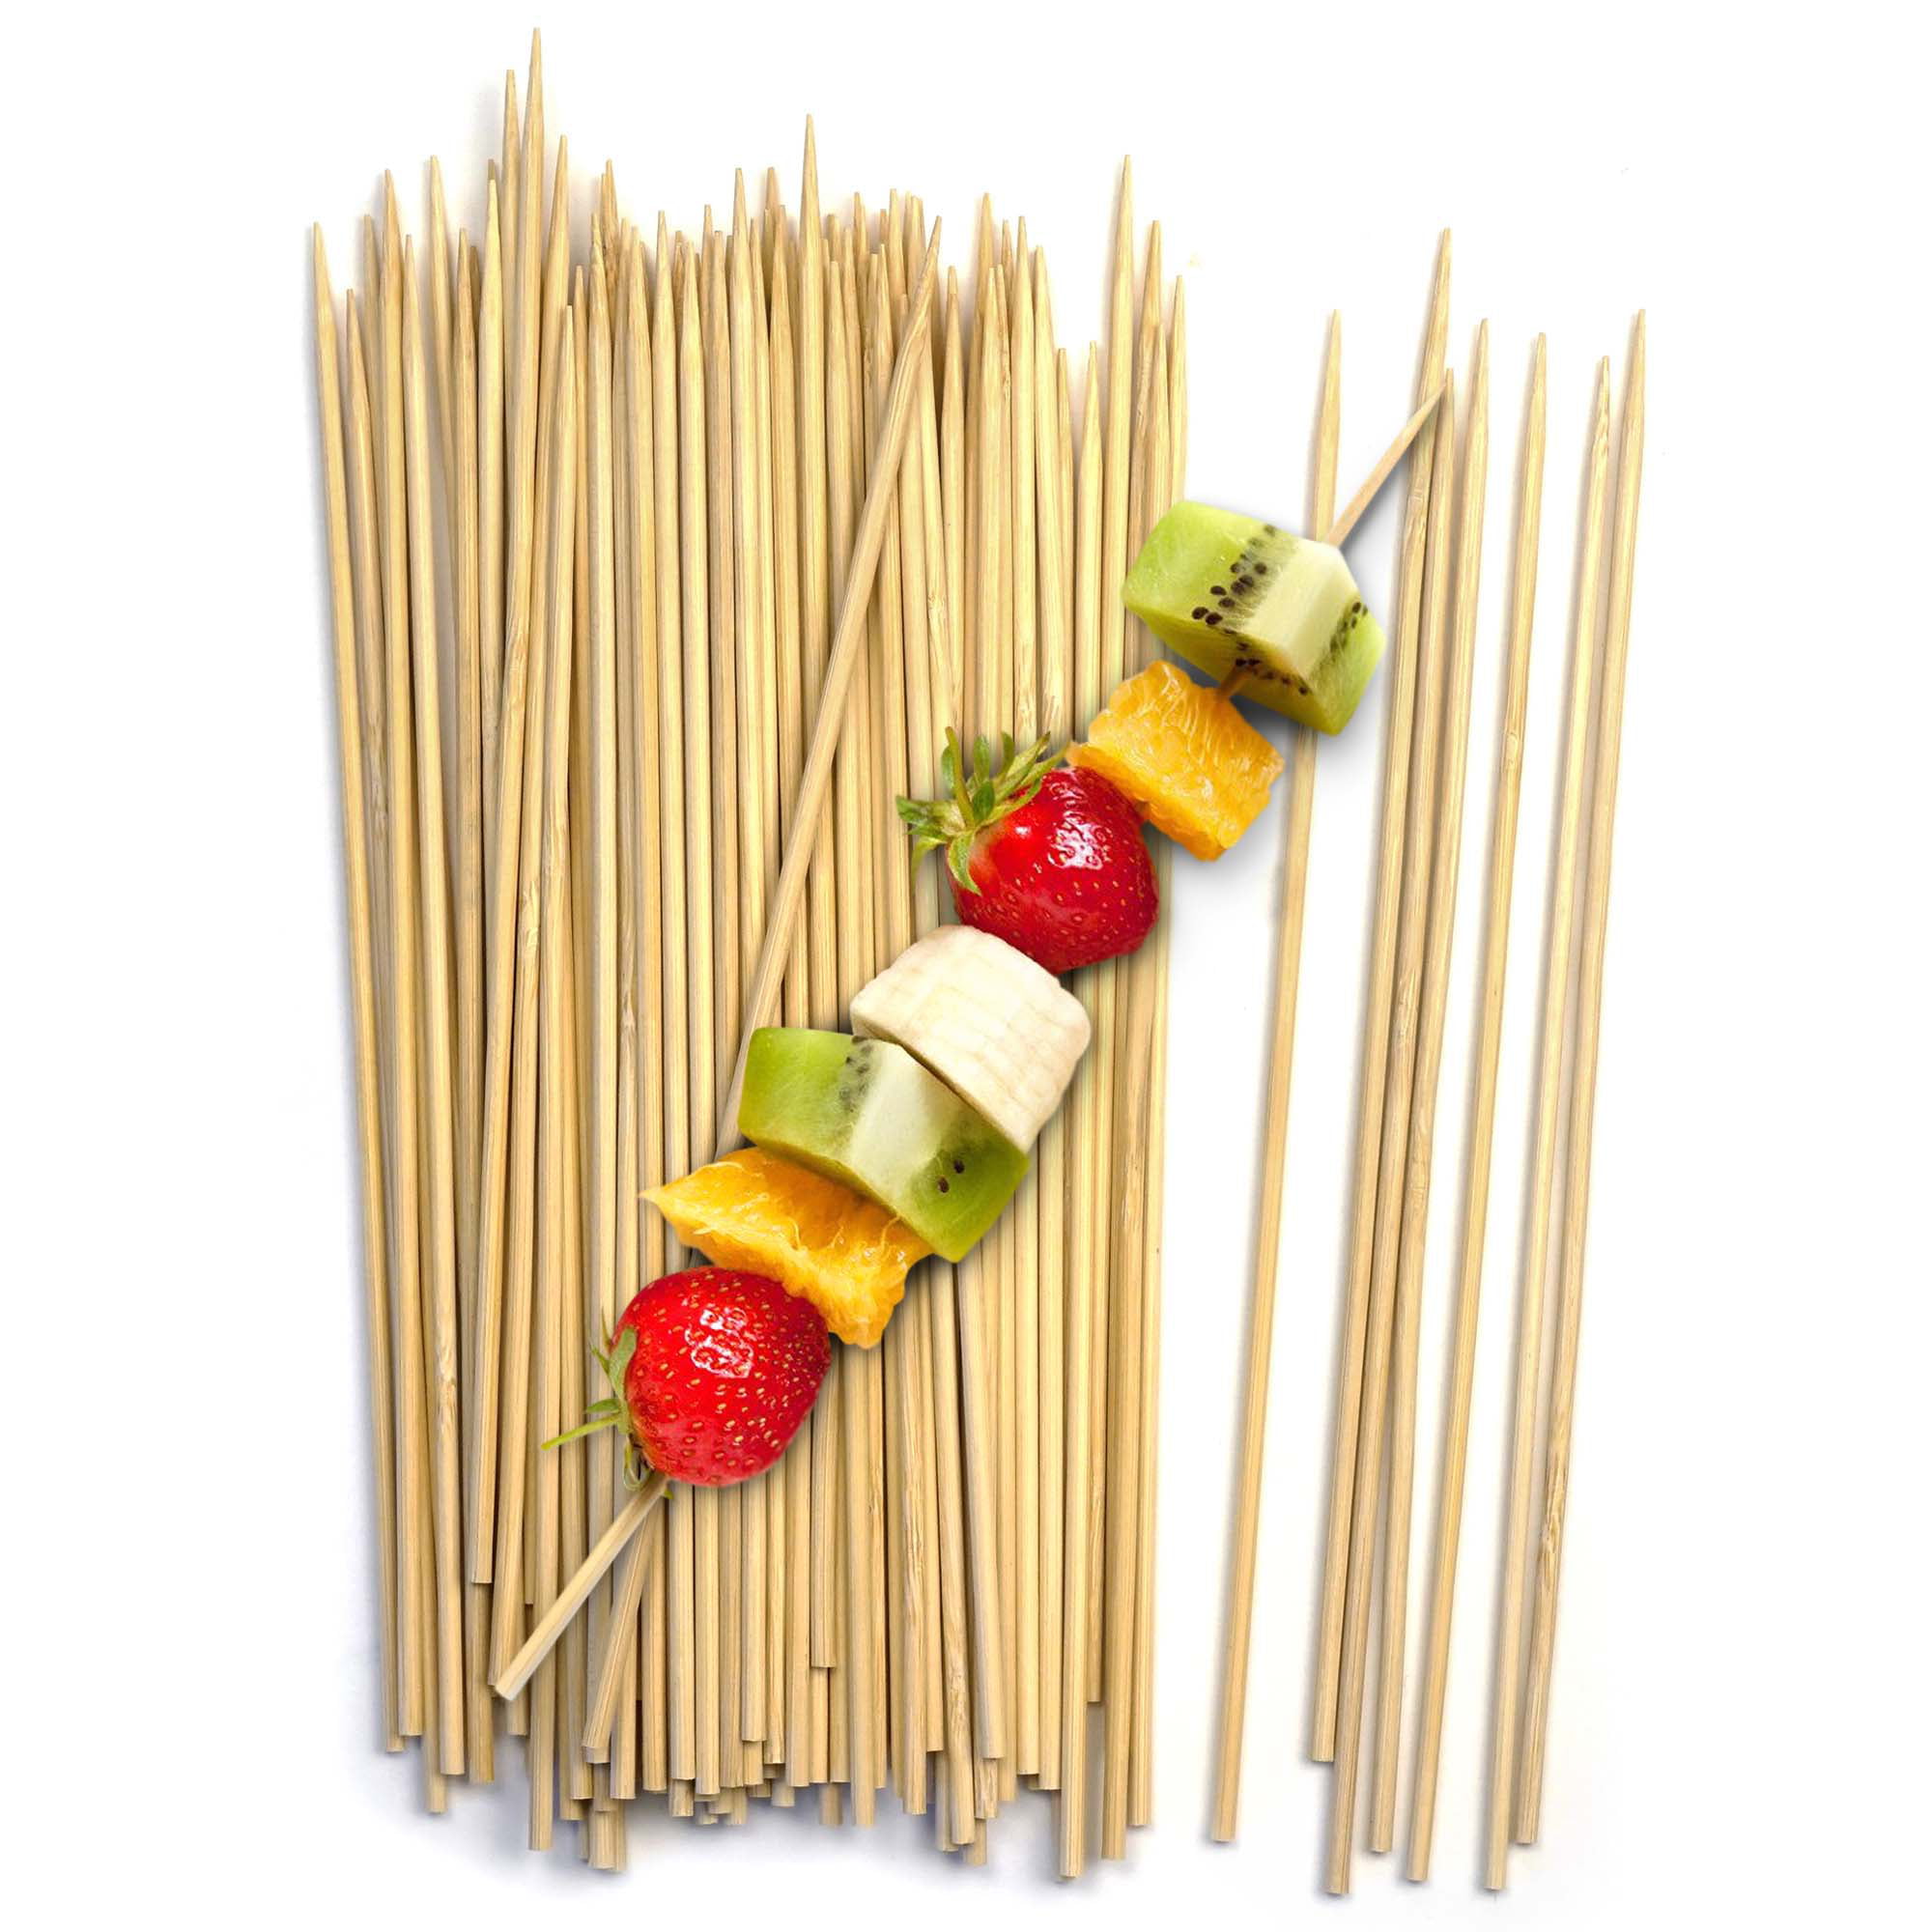 Details about  / 200 BAMBOO SKEWERS Wooden Kebab BBQ Fruit Chocolate Fountain Fondue Stick